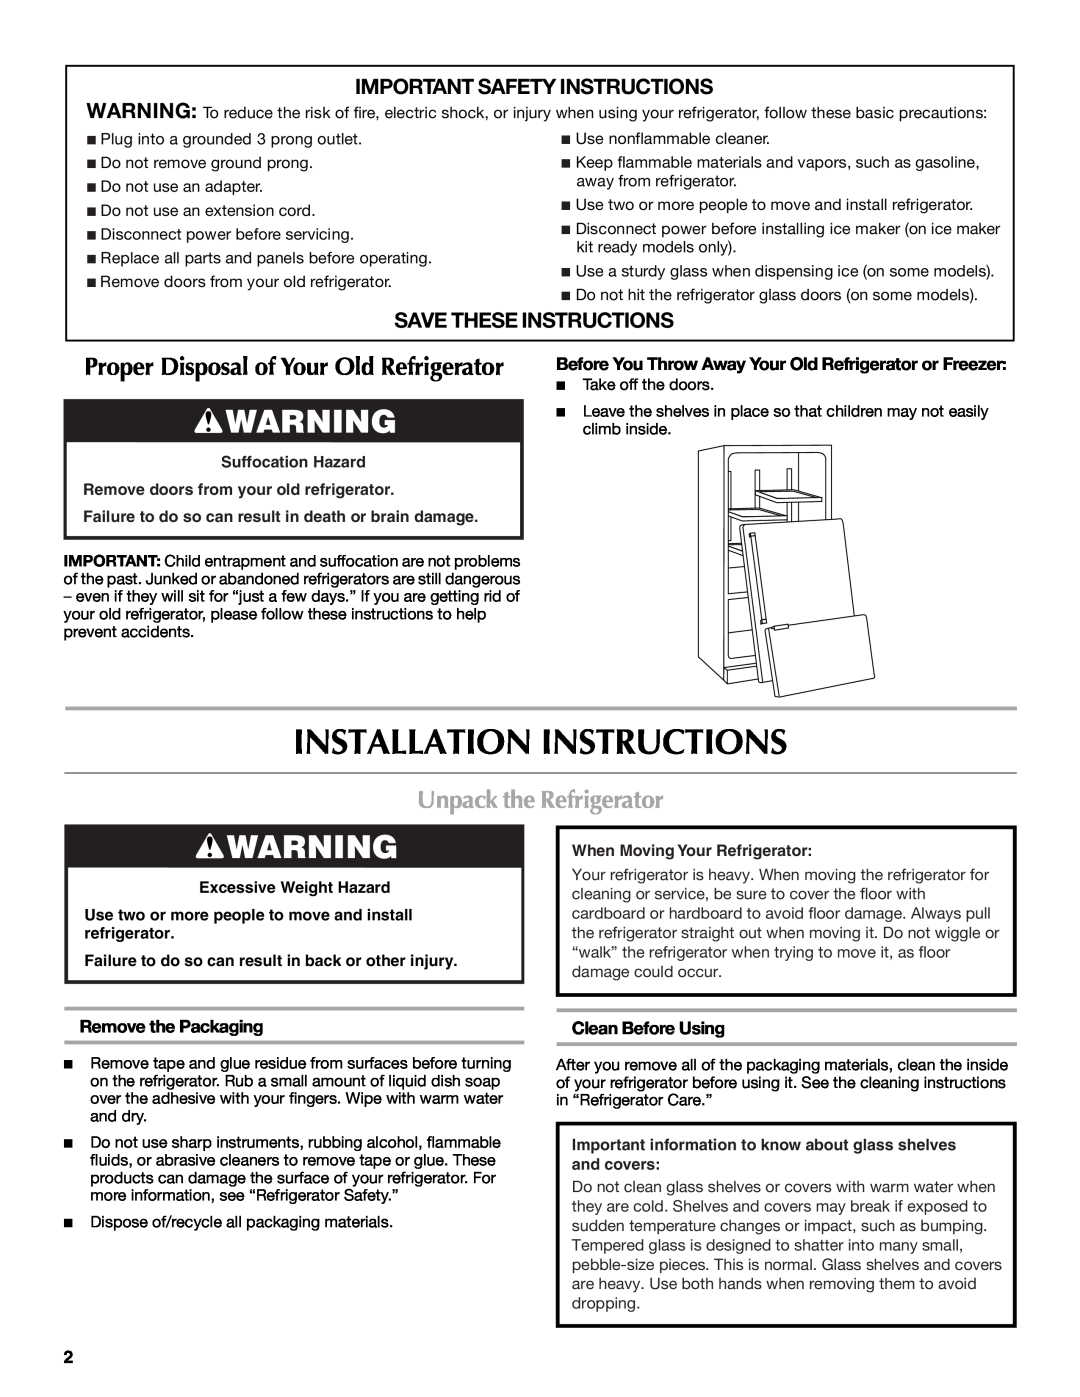 Maytag W10294936A Installation Instructions, Unpack the Refrigerator, Important Safety Instructions, Remove the Packaging 